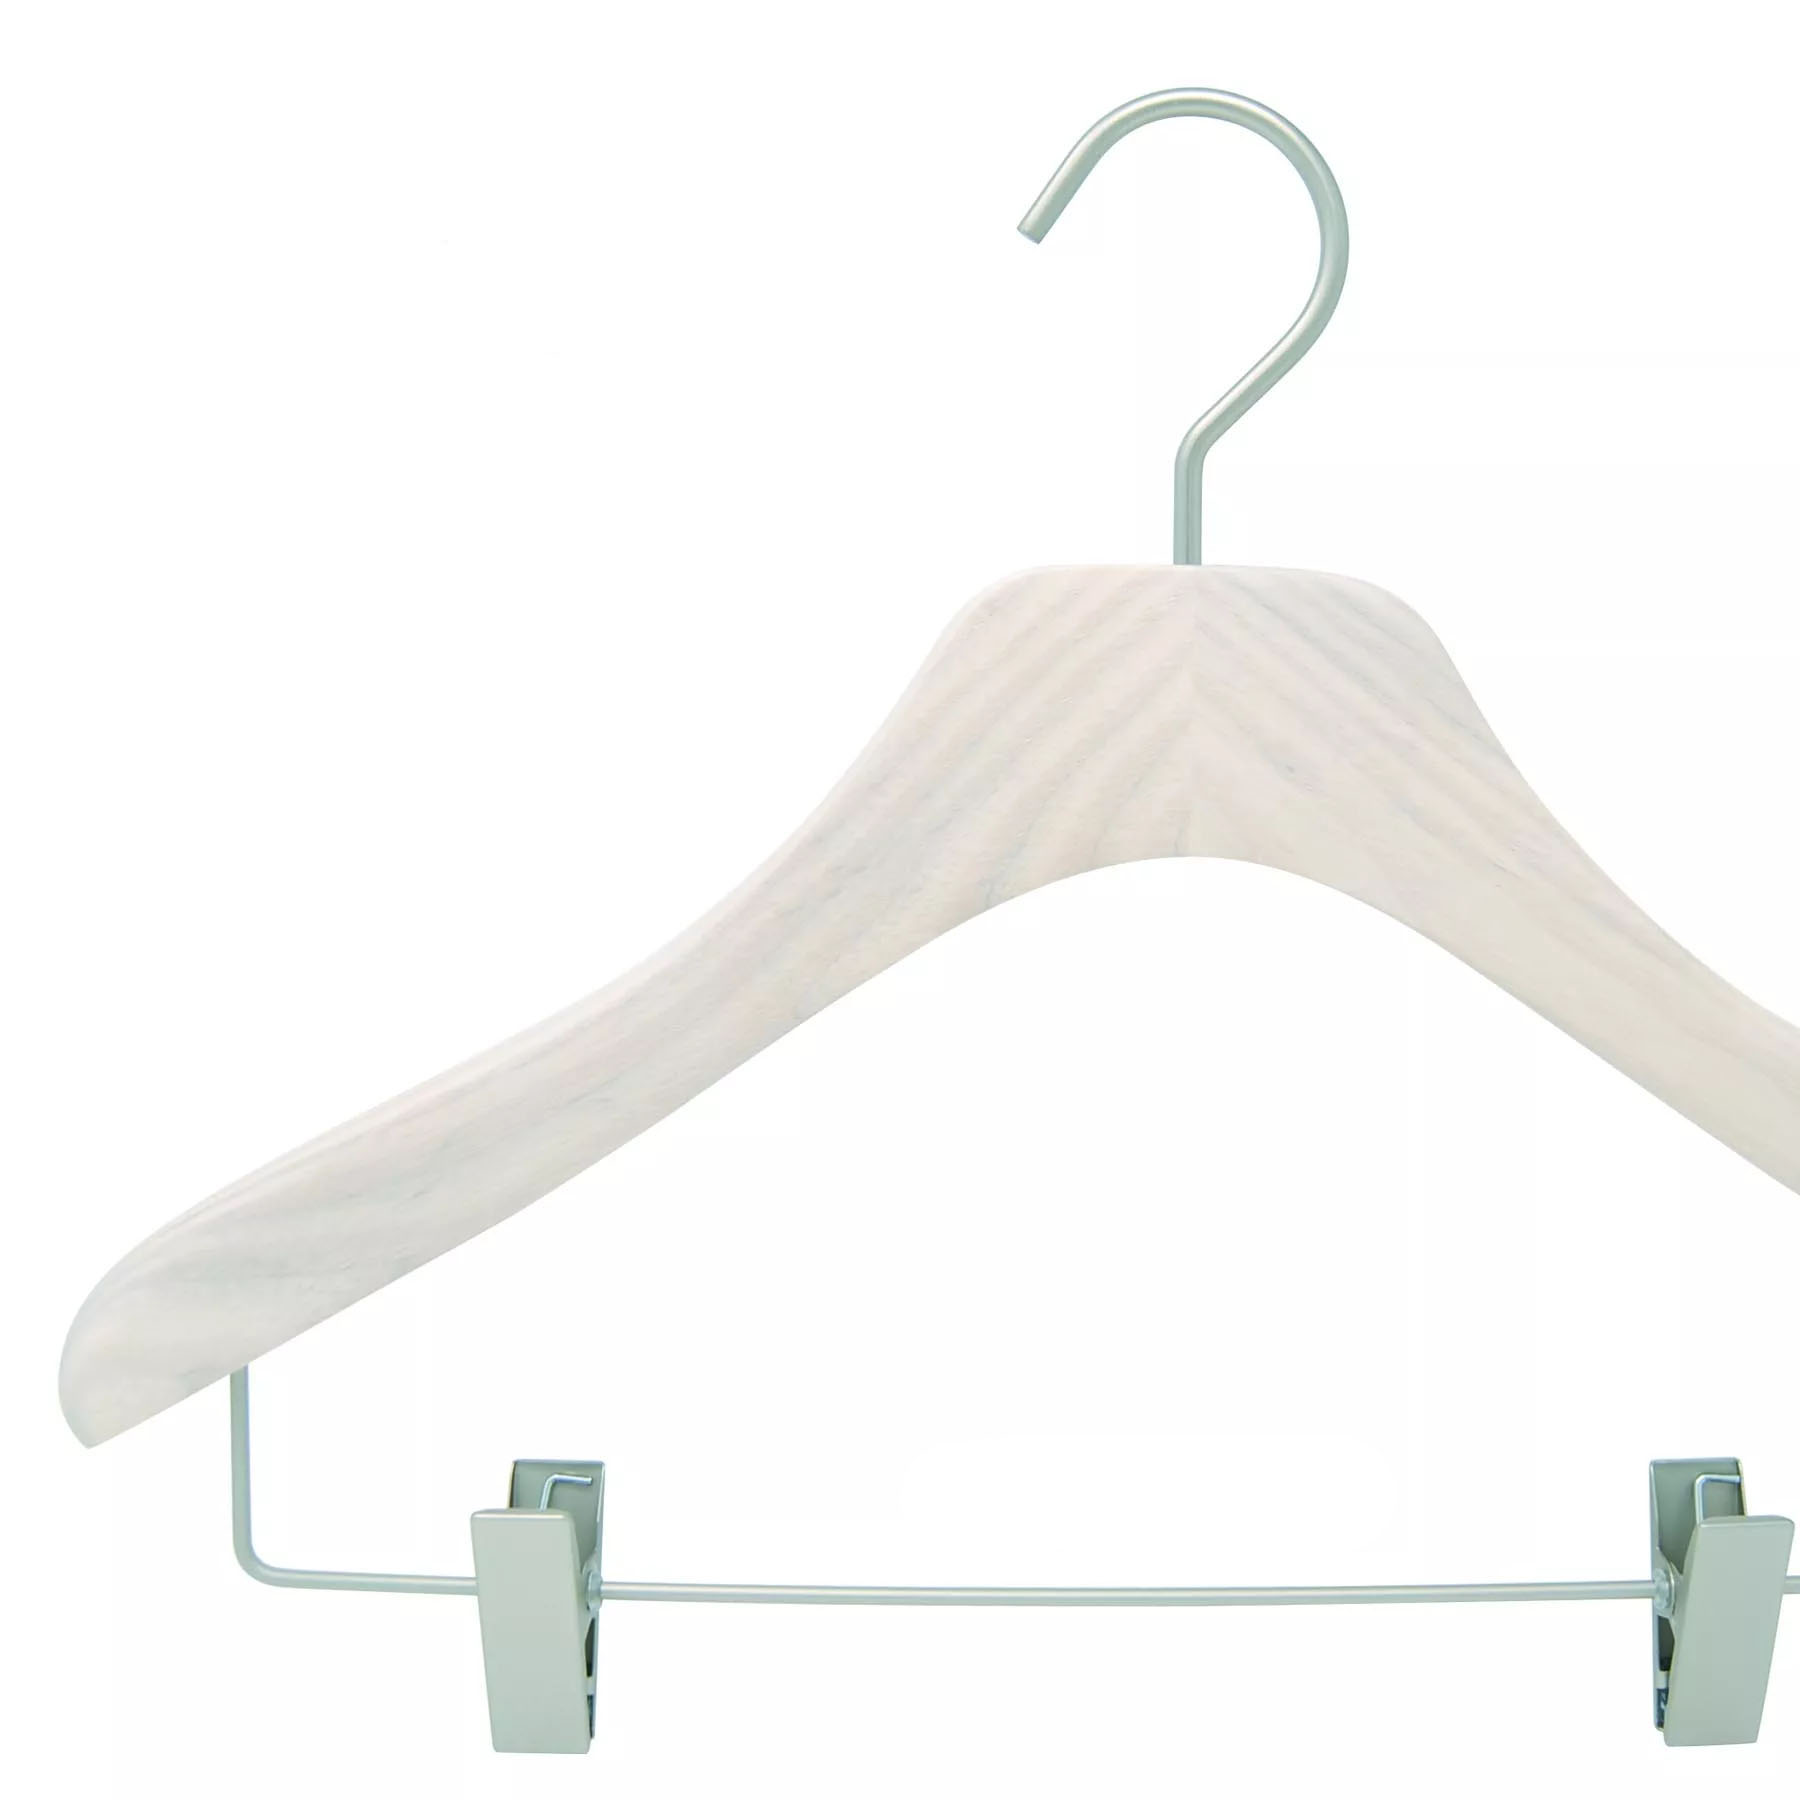 Wooden hanger with clips